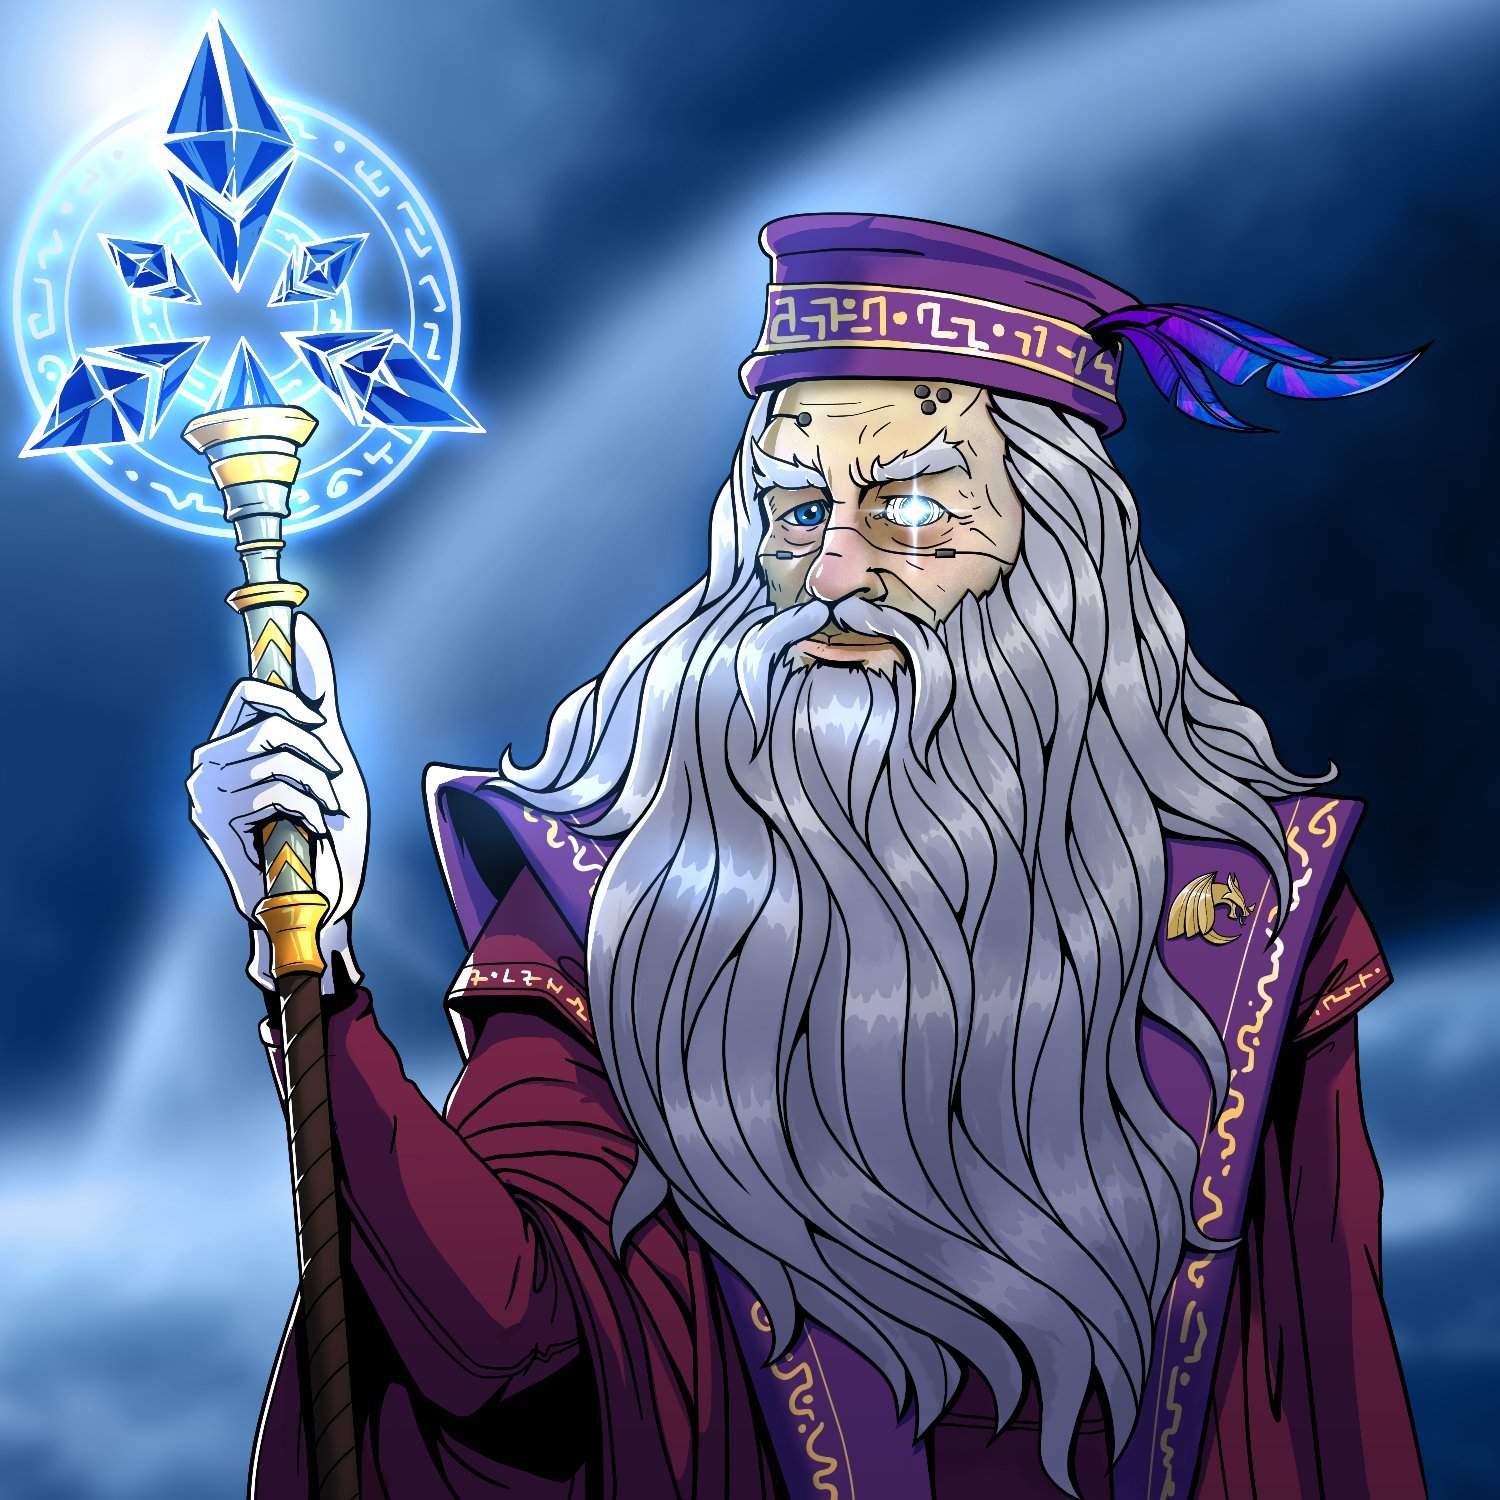 Wizards of OS - Wizardschool Free 2 Mint 🔥 | No Roadmap | No Discord | Become a Wizard 🧙‍♂️ OpenSea https://t.co/YCt3HCou4S Art: @hitartfr